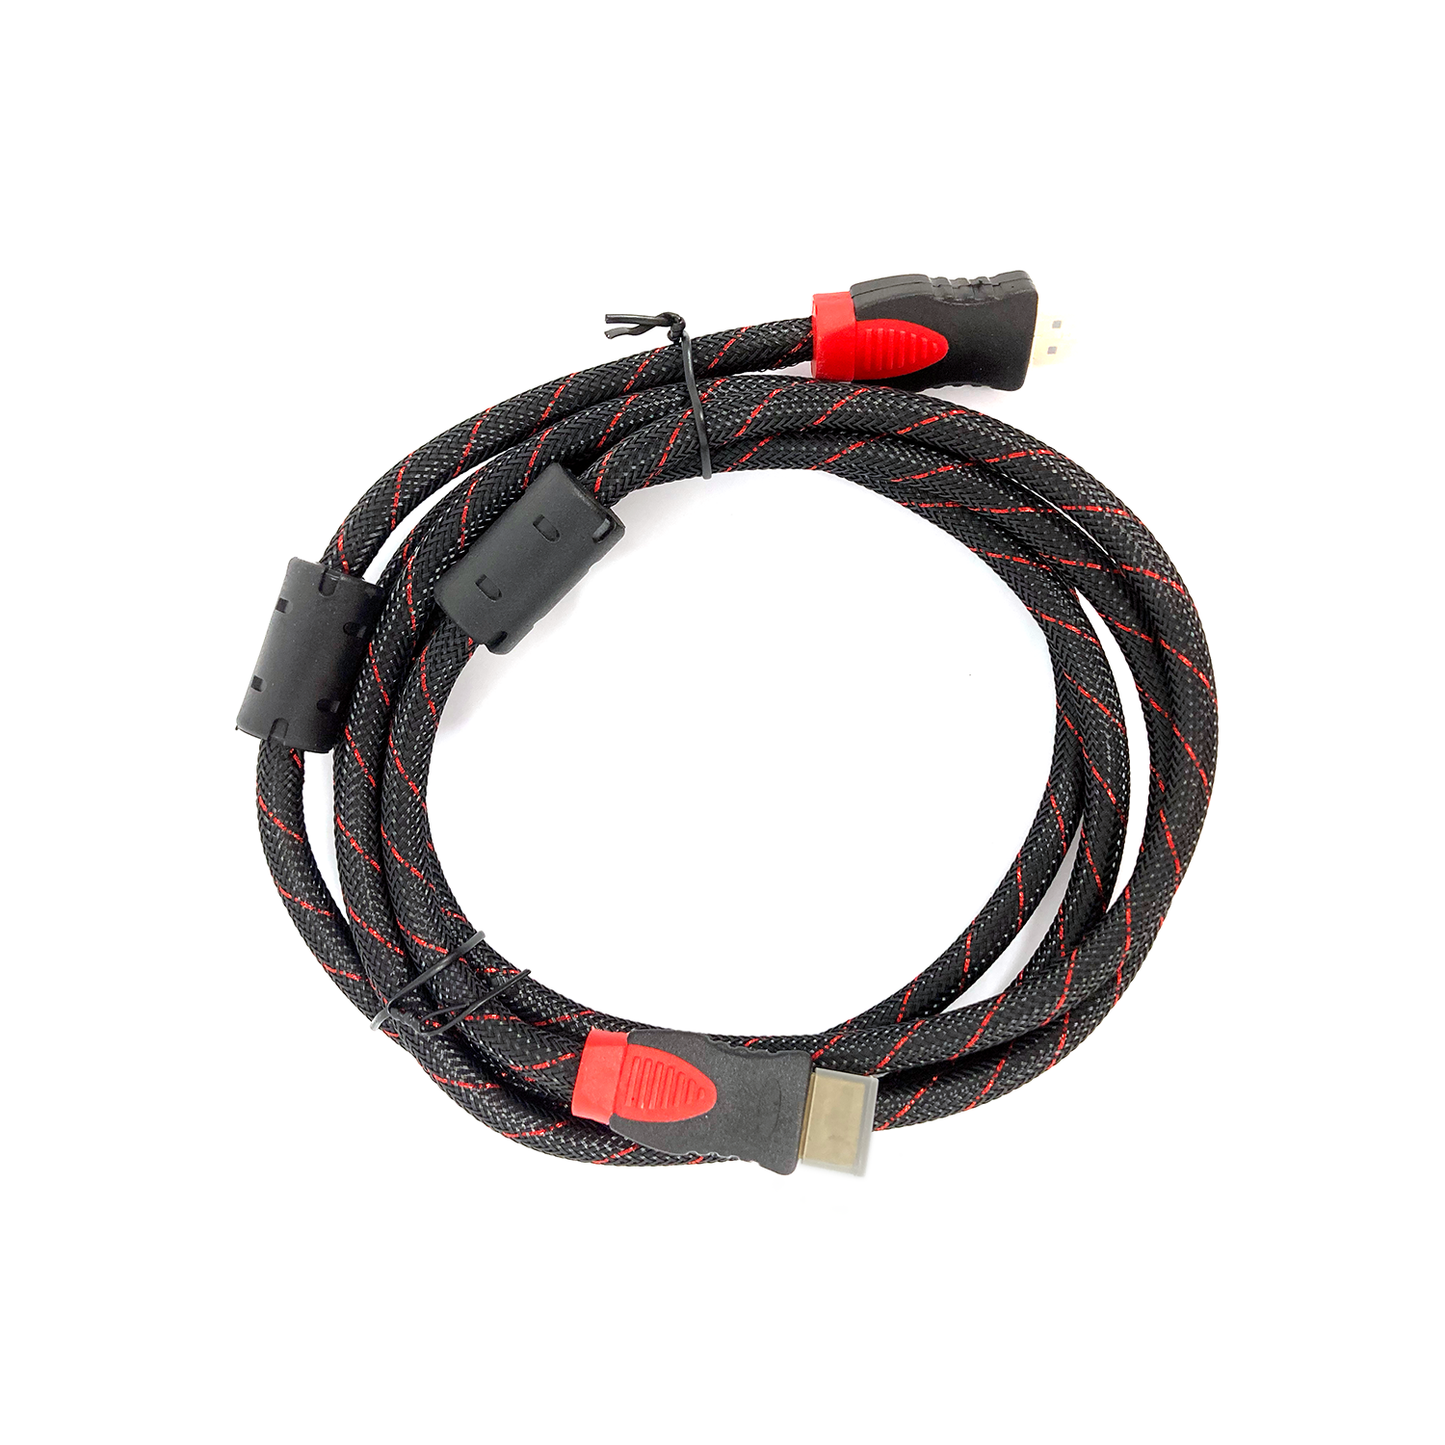 The HDMI Cable is used as the primary display cable for every board, besides Zotac Boards, and must be used in conjunction with an adapter for newer, 64-bit boards. Sold by Miele Manufacturing.